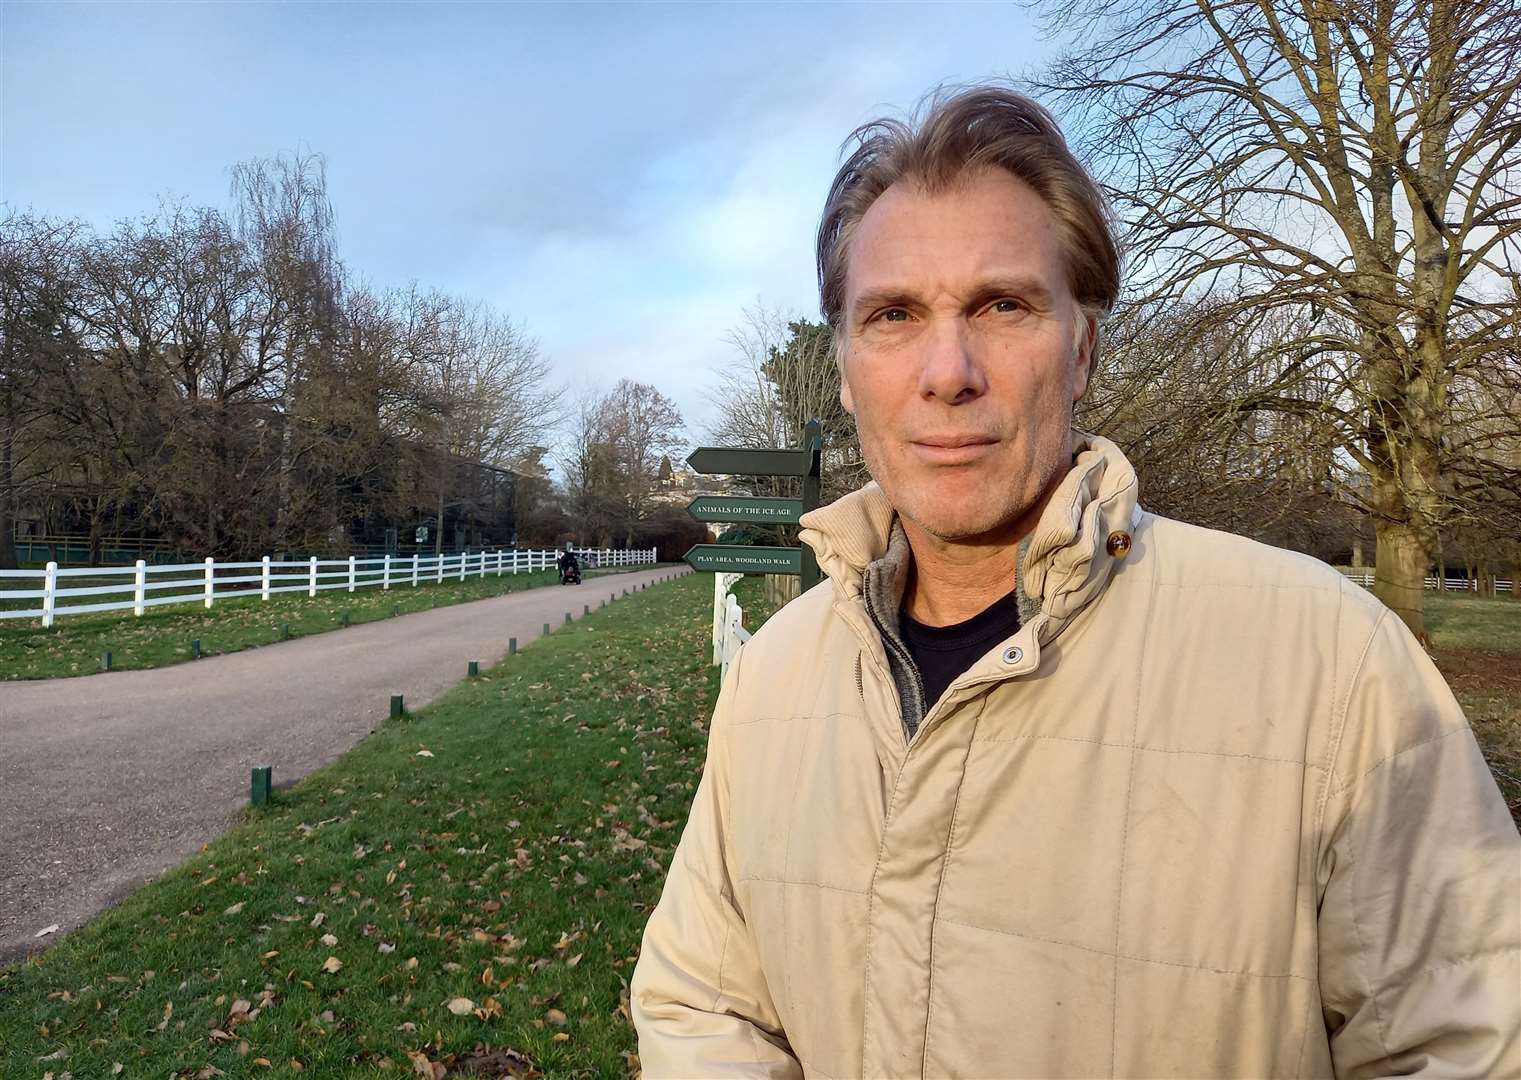 Damian Aspinall, who runs Howletts, near Canterbury, shared the video on Instagram